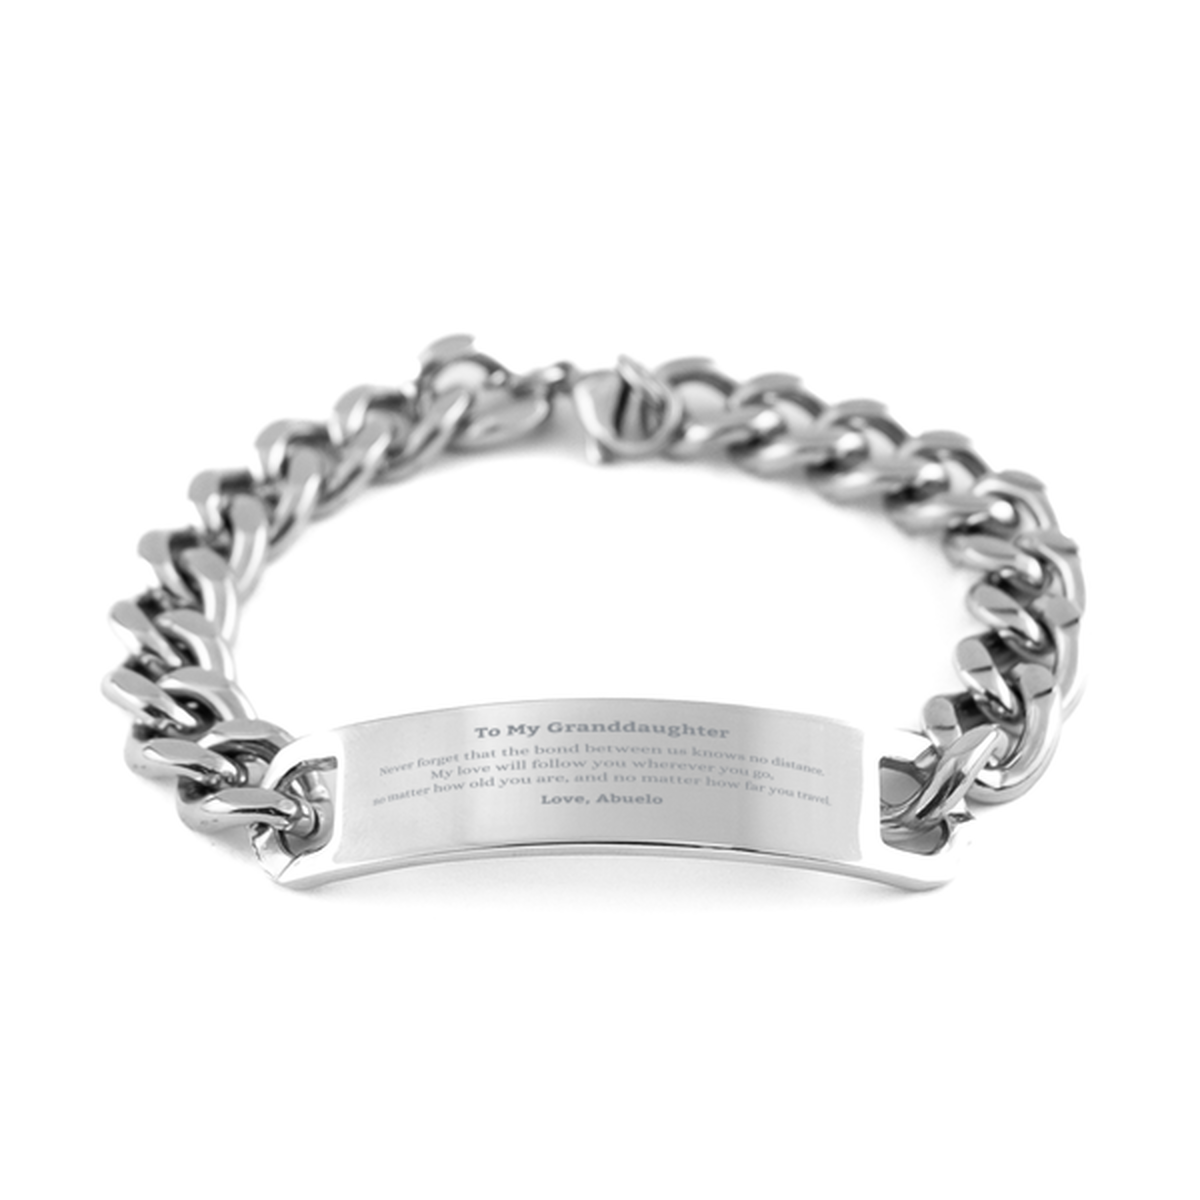 Granddaughter Birthday Gifts from Abuelo, Adjustable Cuban Chain Stainless Steel Bracelet for Granddaughter Christmas Graduation Unique Gifts Granddaughter Never forget that the bond between us knows no distance. Love, Abuelo